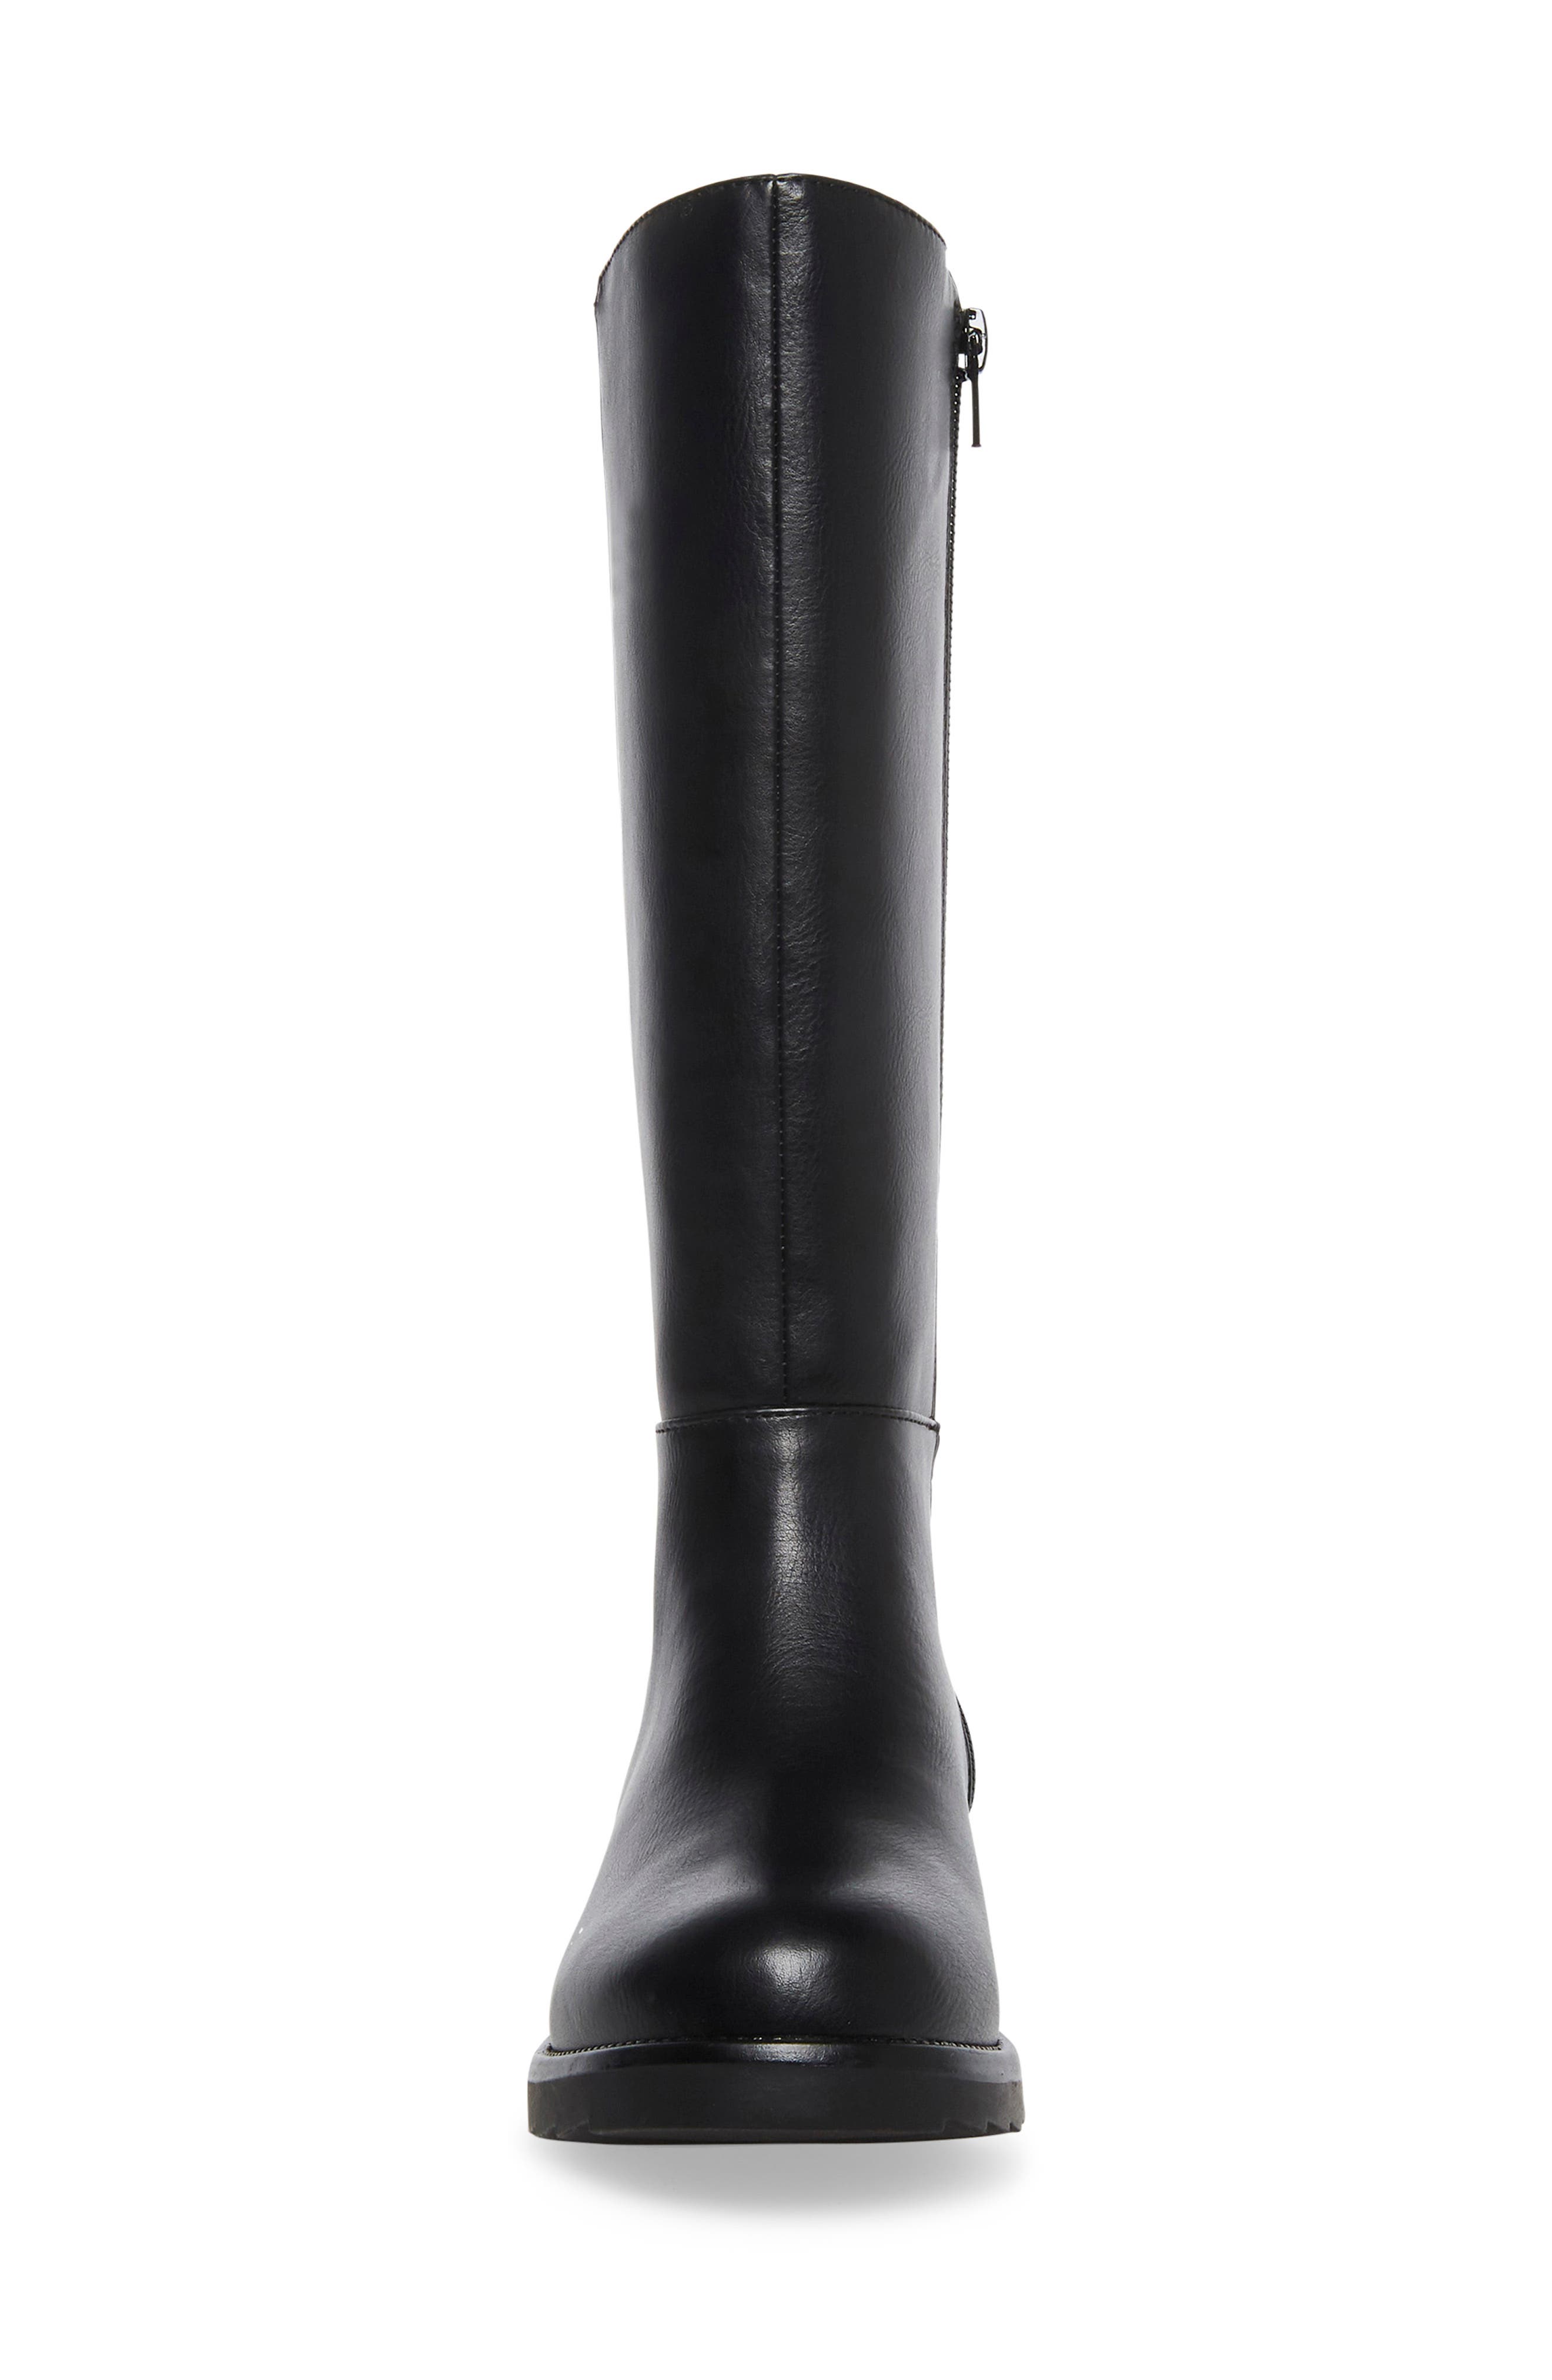 Black Leather Riding Boot Vintage Tall Equestrian Steve Madden Women’s 7